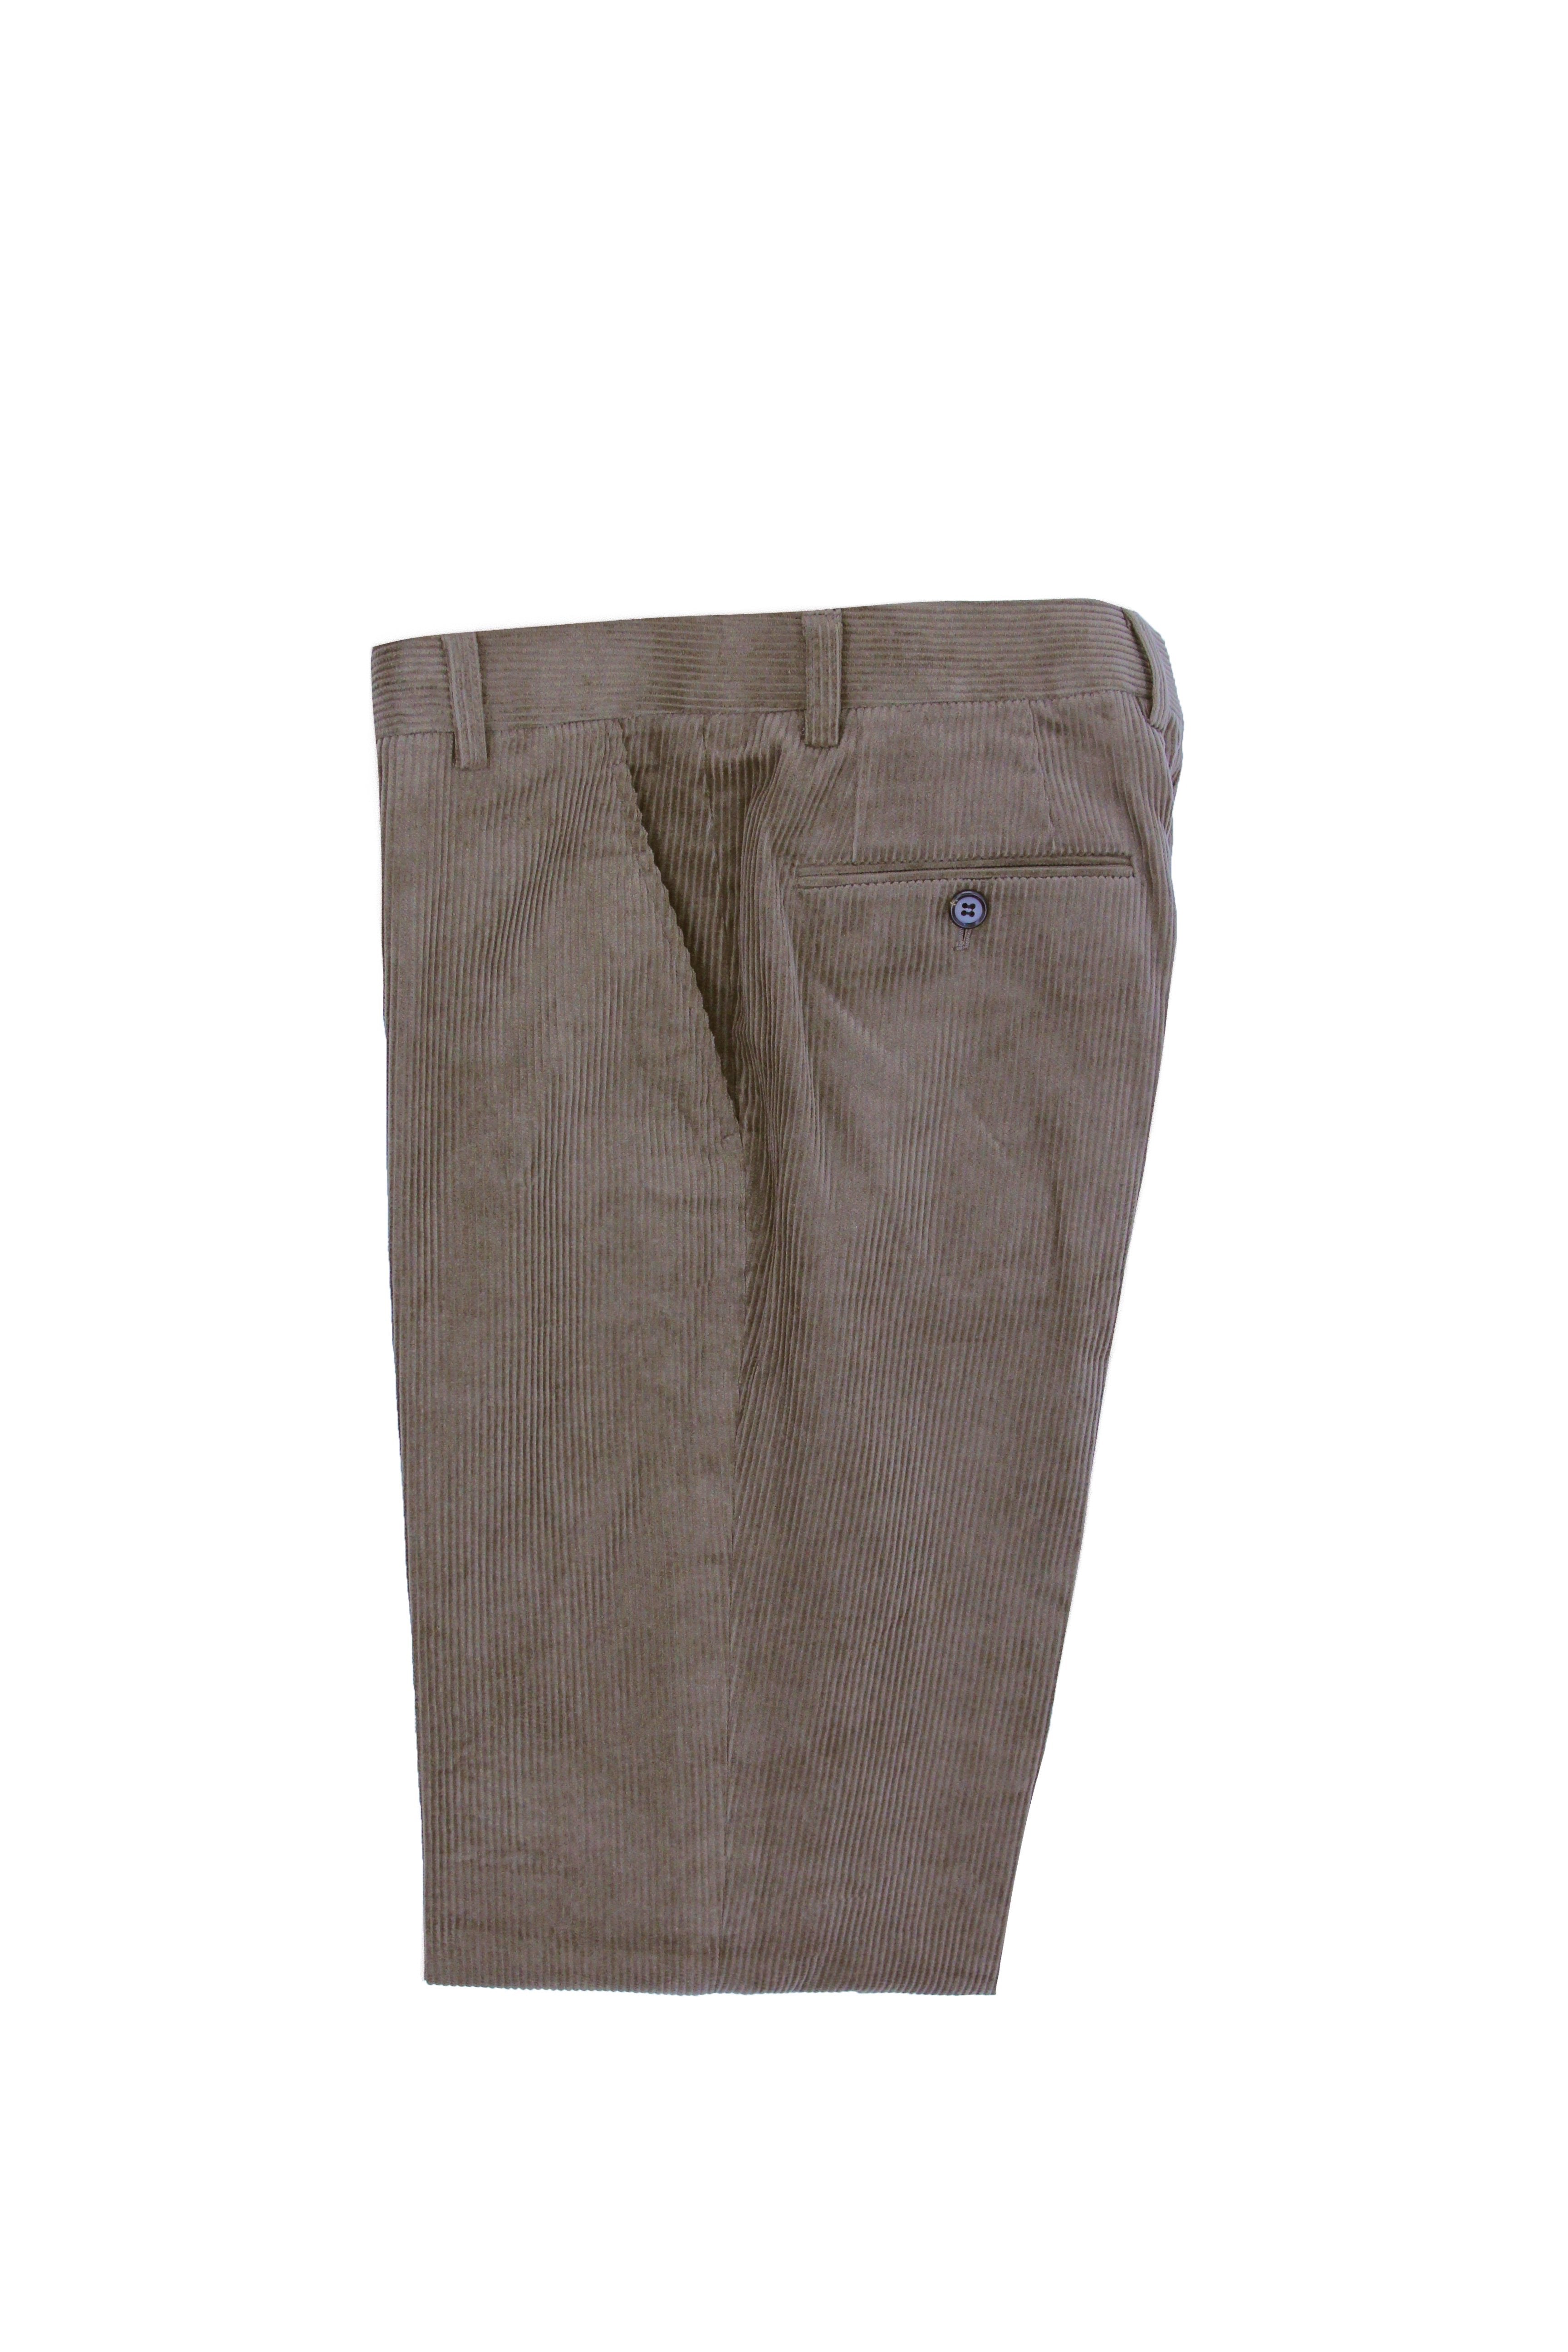 Cognac Corduroy Trousers - Stancliffe Flat-Front in 8-Wale Cotton